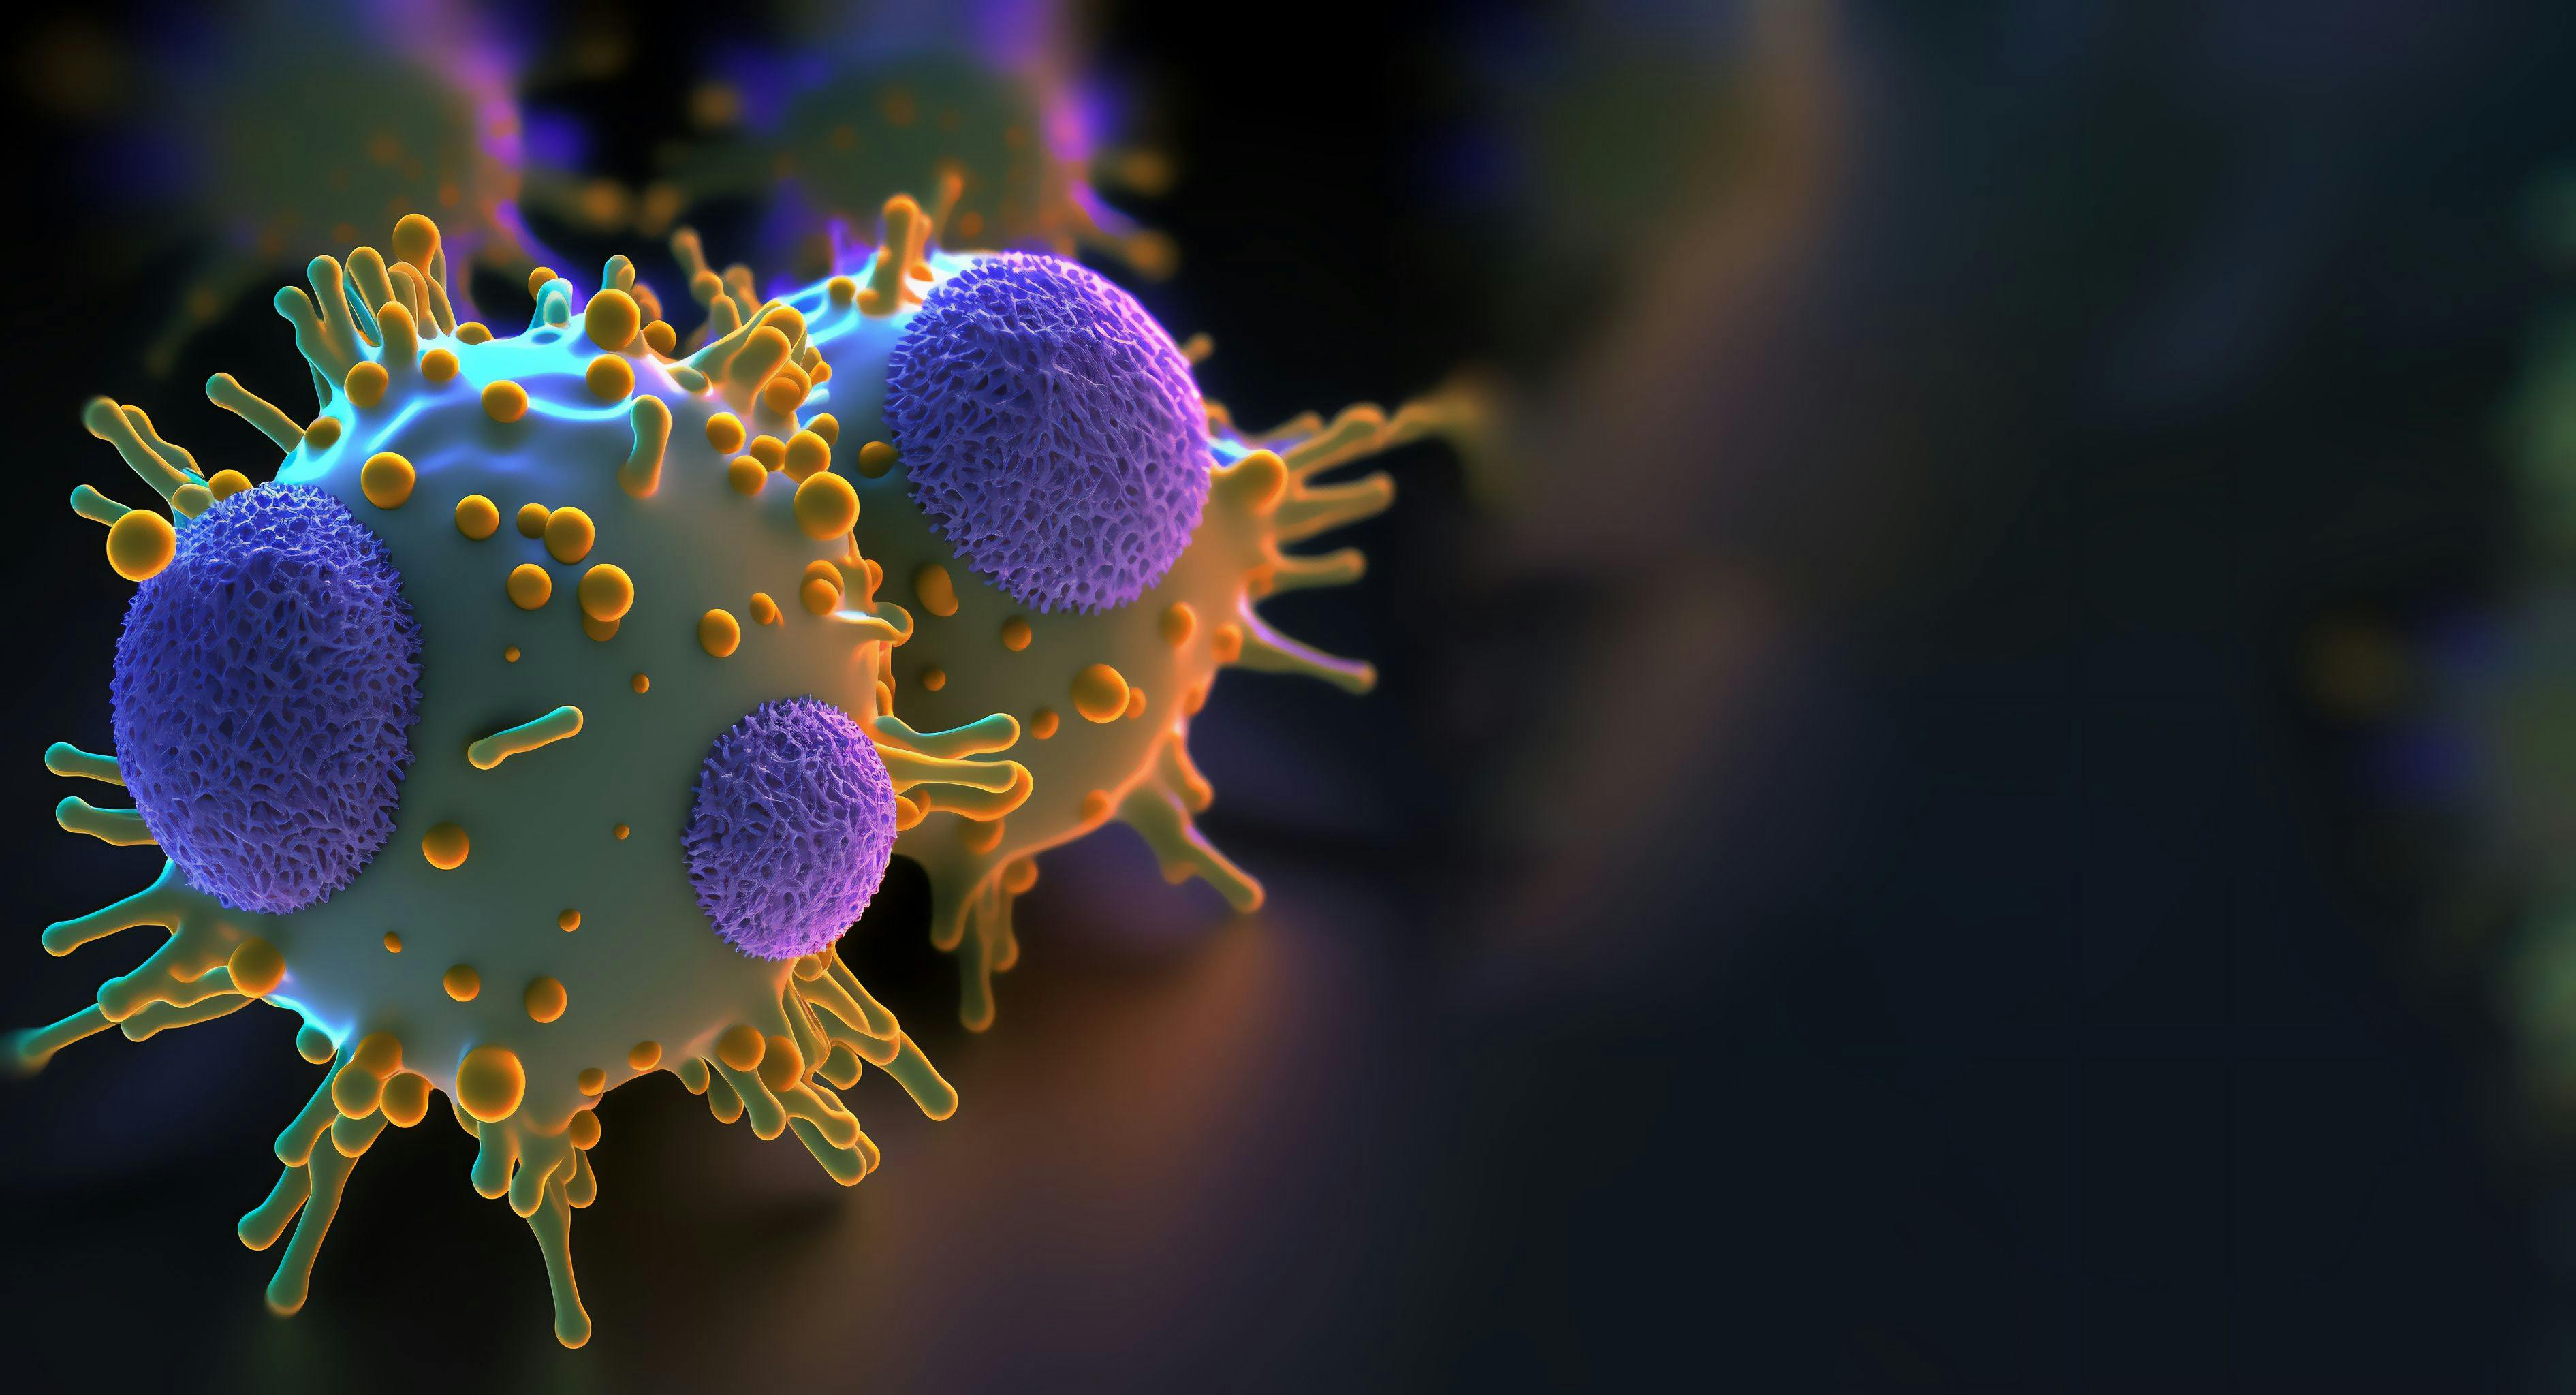 Chimeric antigen receptor CAR - car T-Cell therapy, CAR T-cell therapy is the use of genetically modified T cells that express a special protein called a chimeric antigen receptor 3d rendering - Image credit: catalin | stock.adobe.com